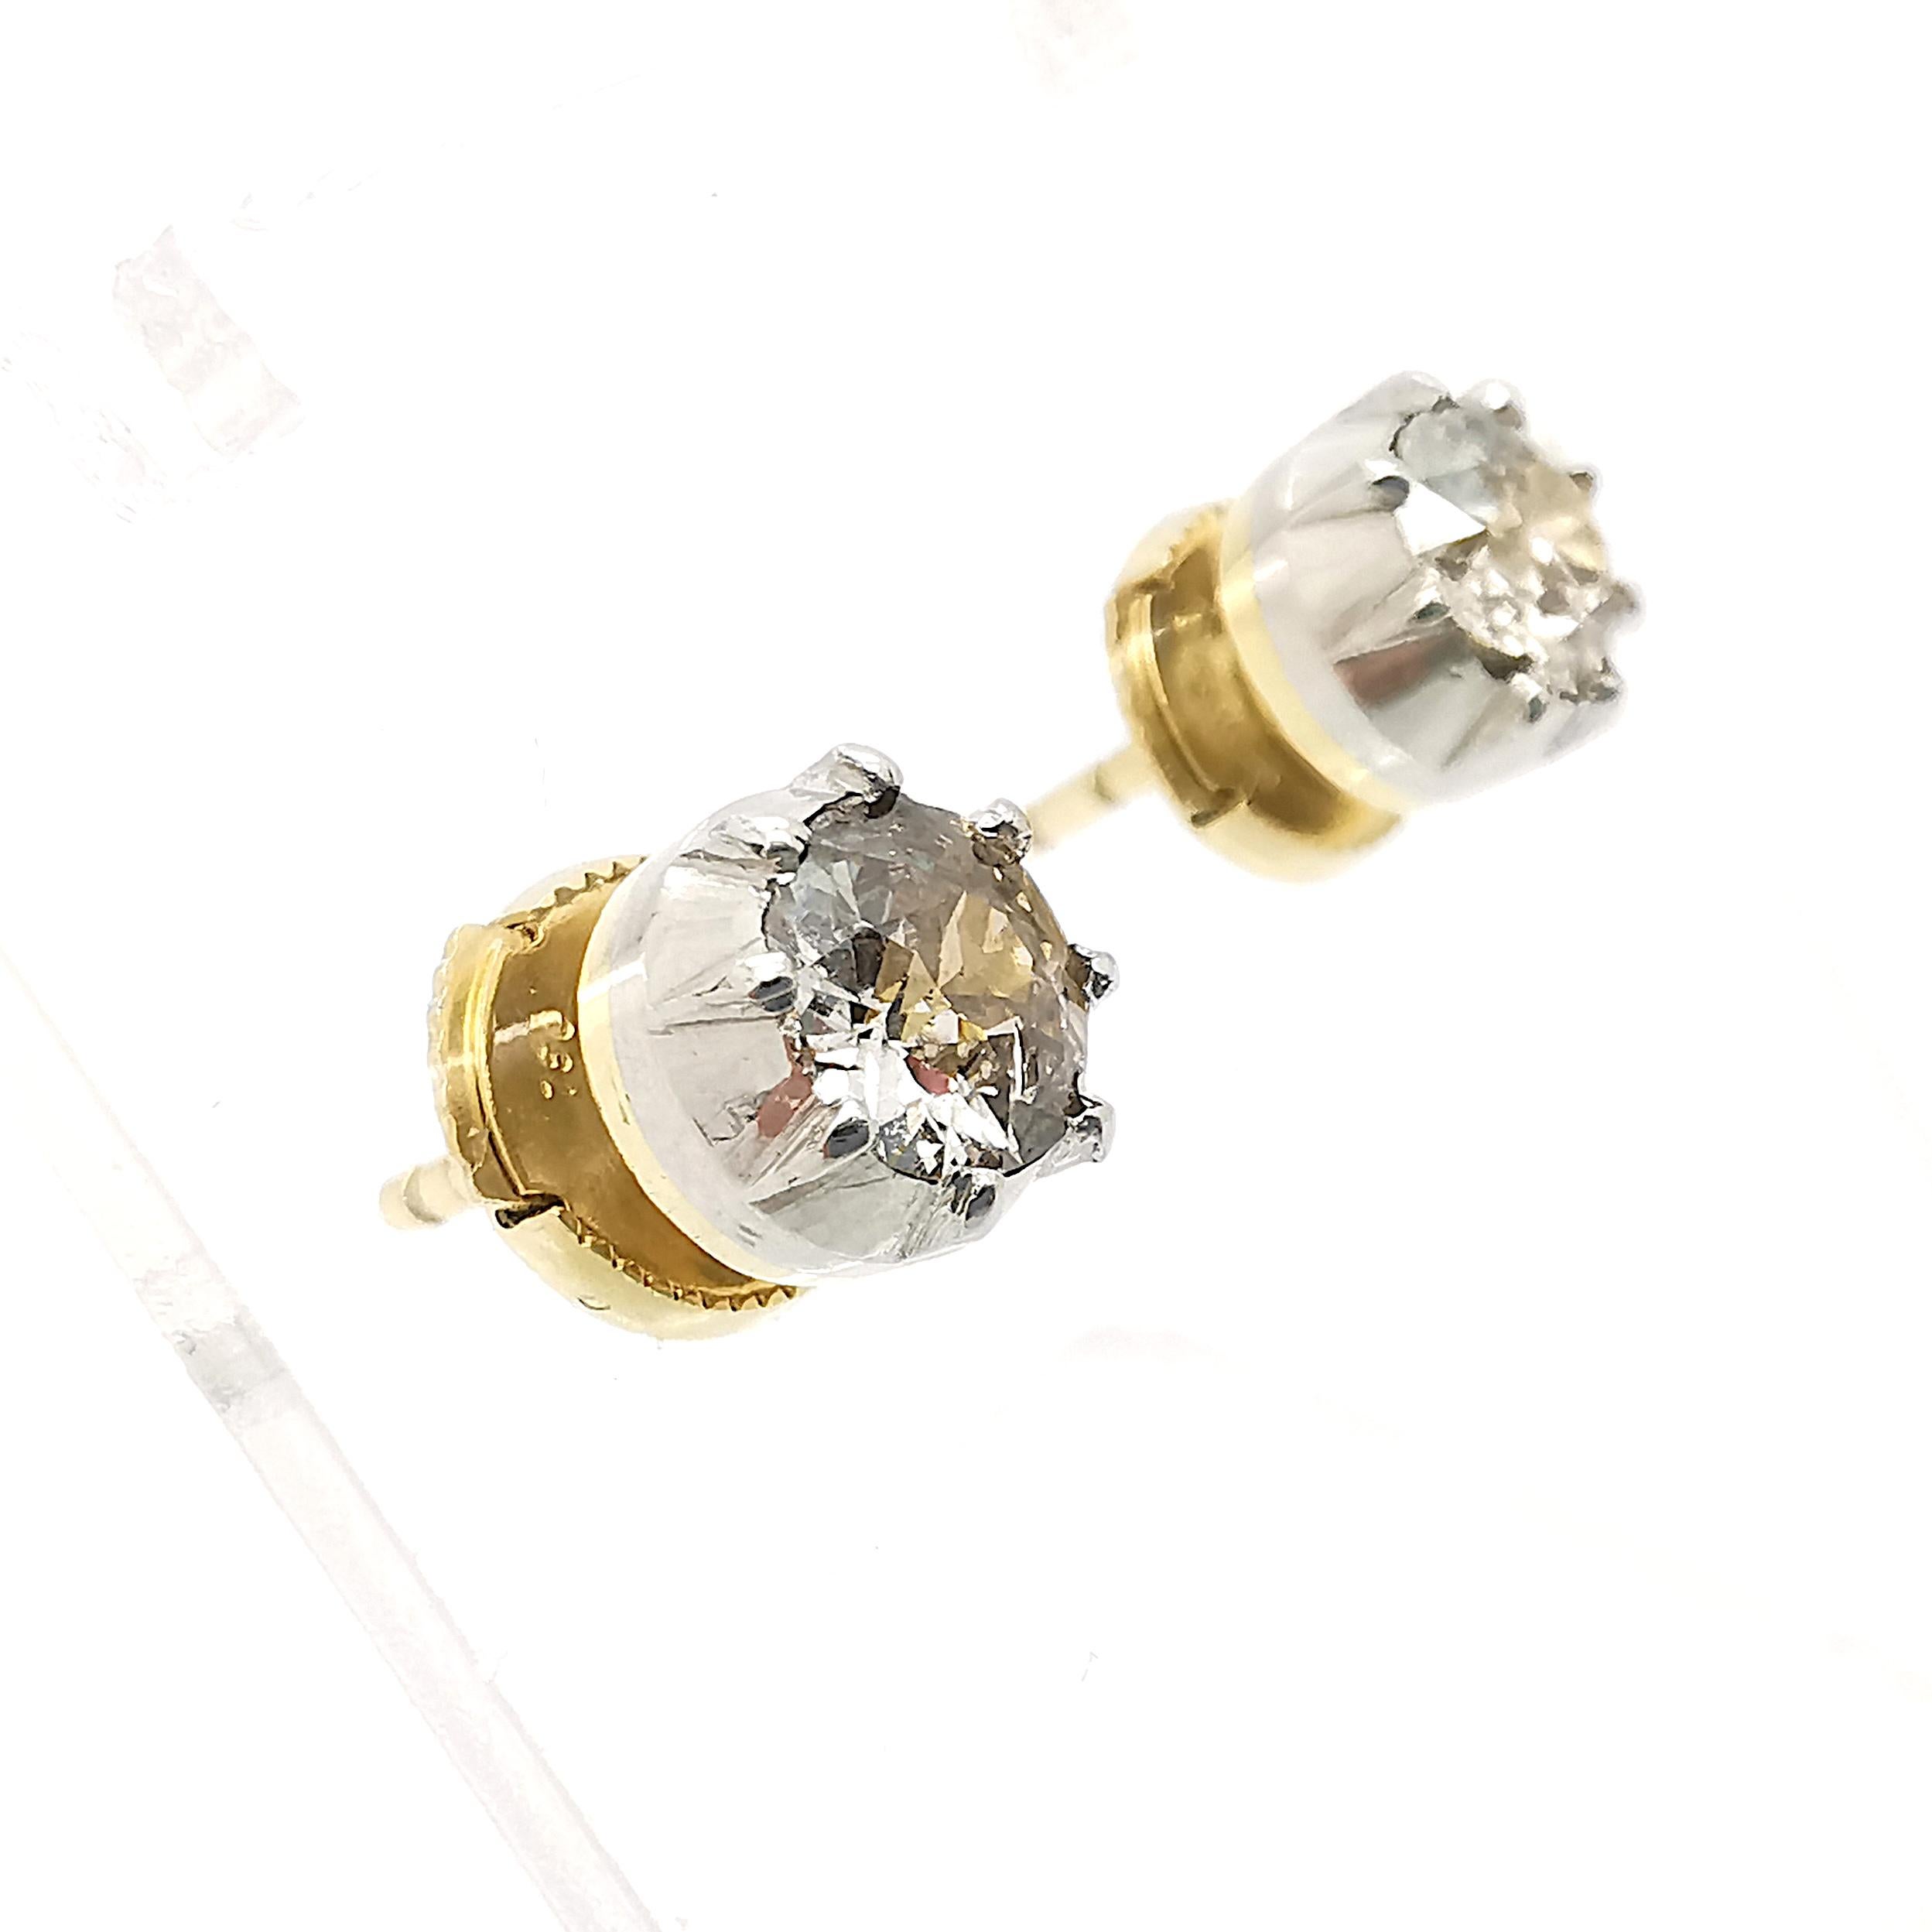 A pair of single stone diamond ear studs, with old cut diamonds in cut down settings, mounted in silver-upon-gold, with post and alpha clip fittings. Estimated total diamond weight 1.00ct.